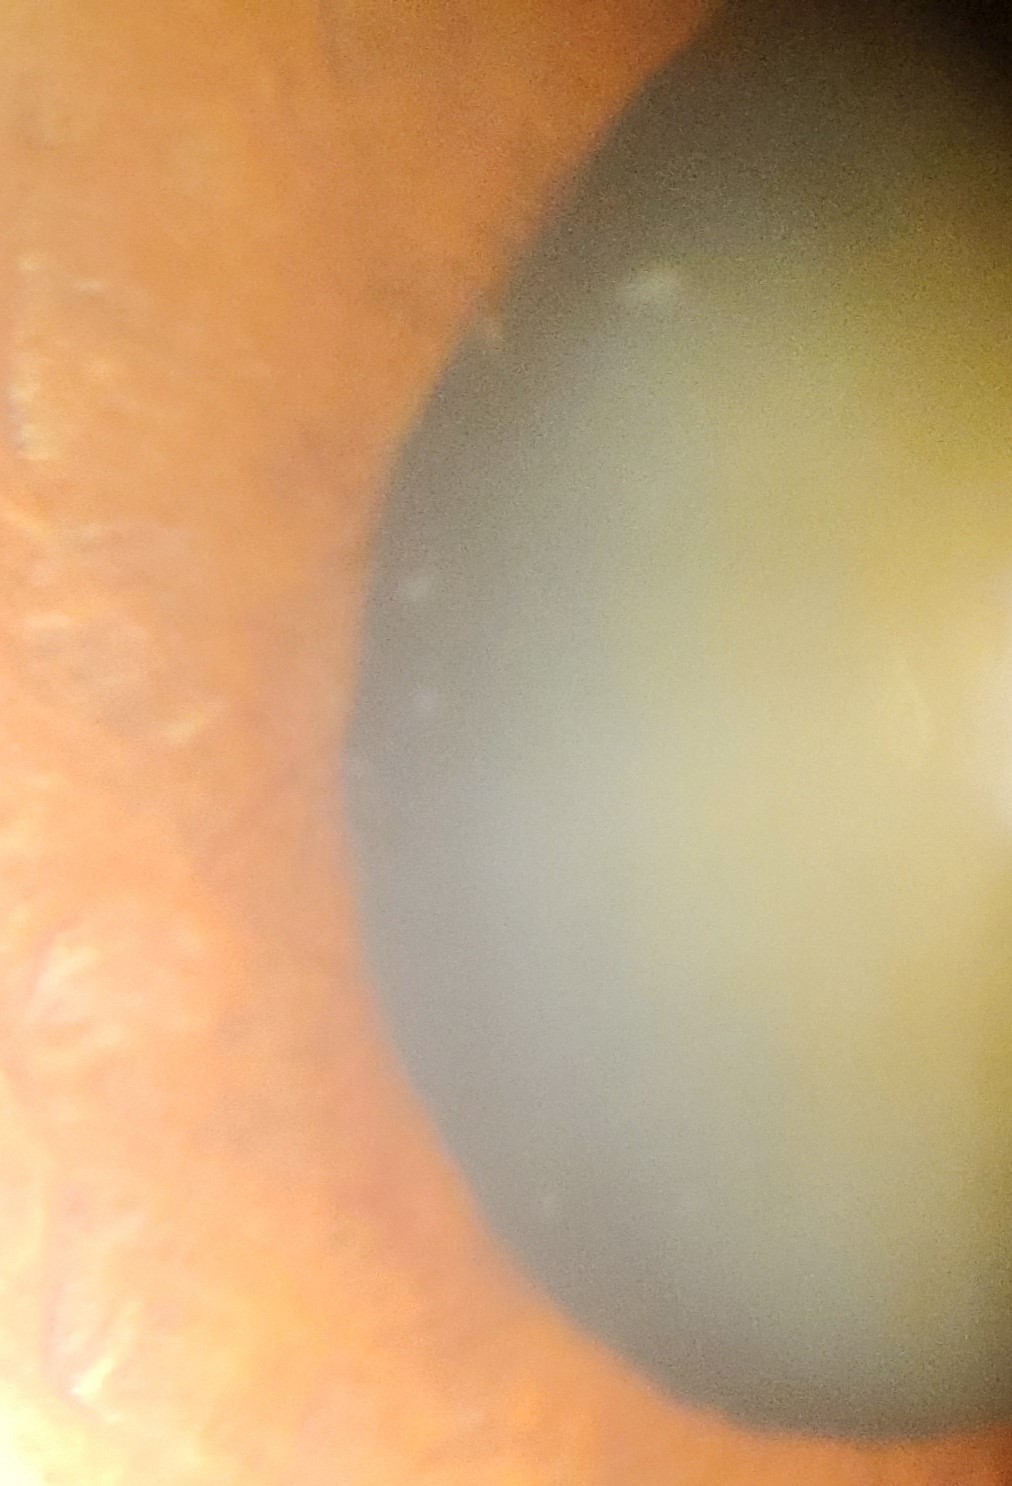 Individual with pseudoexfoliation syndrome (PEX) and cataract